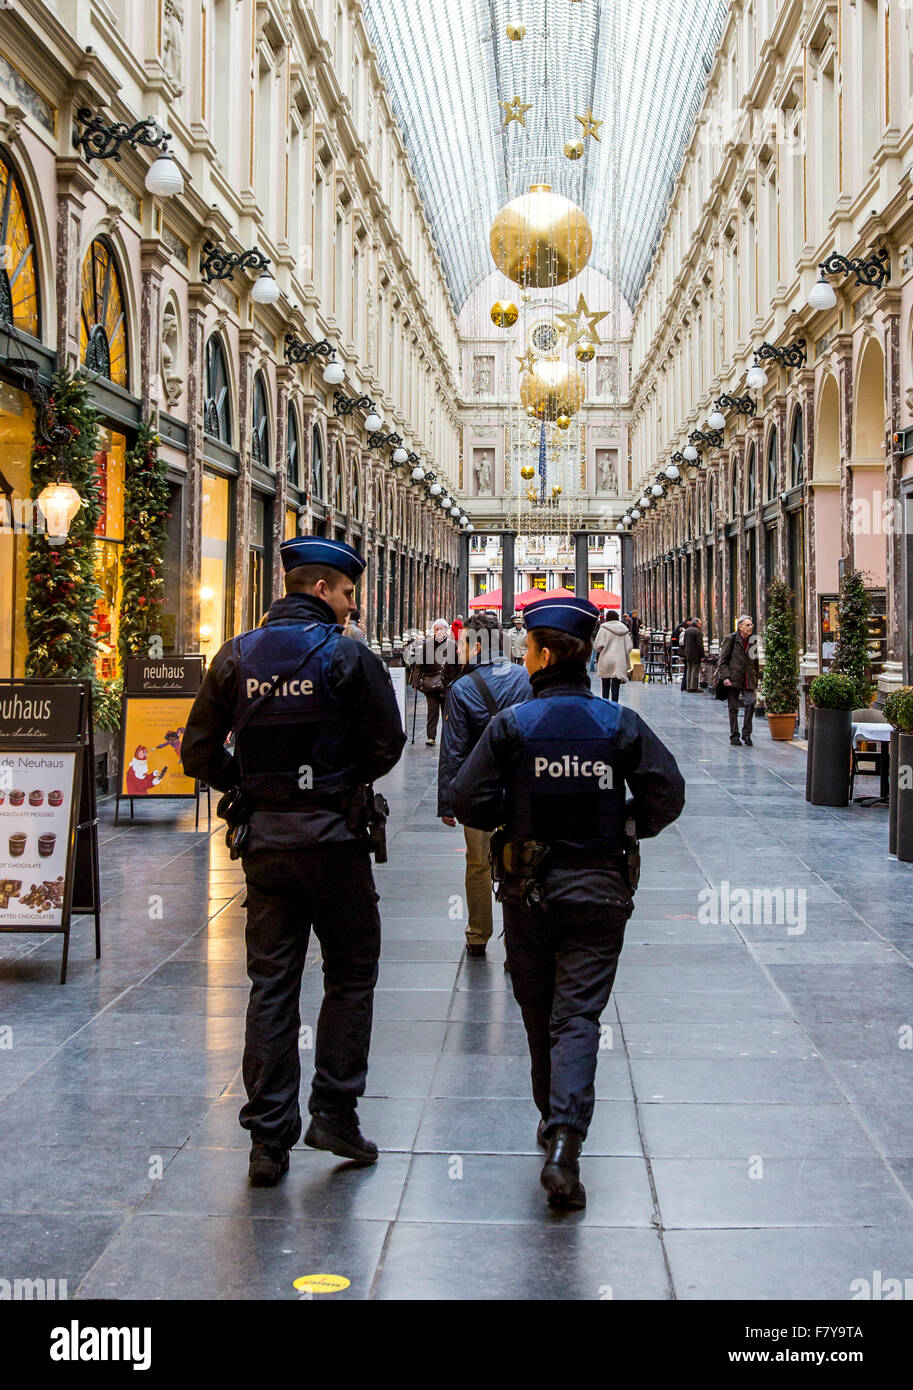 Brussels, Belgium. 3rd Dec, 2015. Belgium security forces patrol the city of Brussels, after a terrorism alert, Belgium Police in the Galeries Royales Saint-Hubert, Shopping Mall, Credit:  Jochen Tack/Alamy Live News Stock Photo